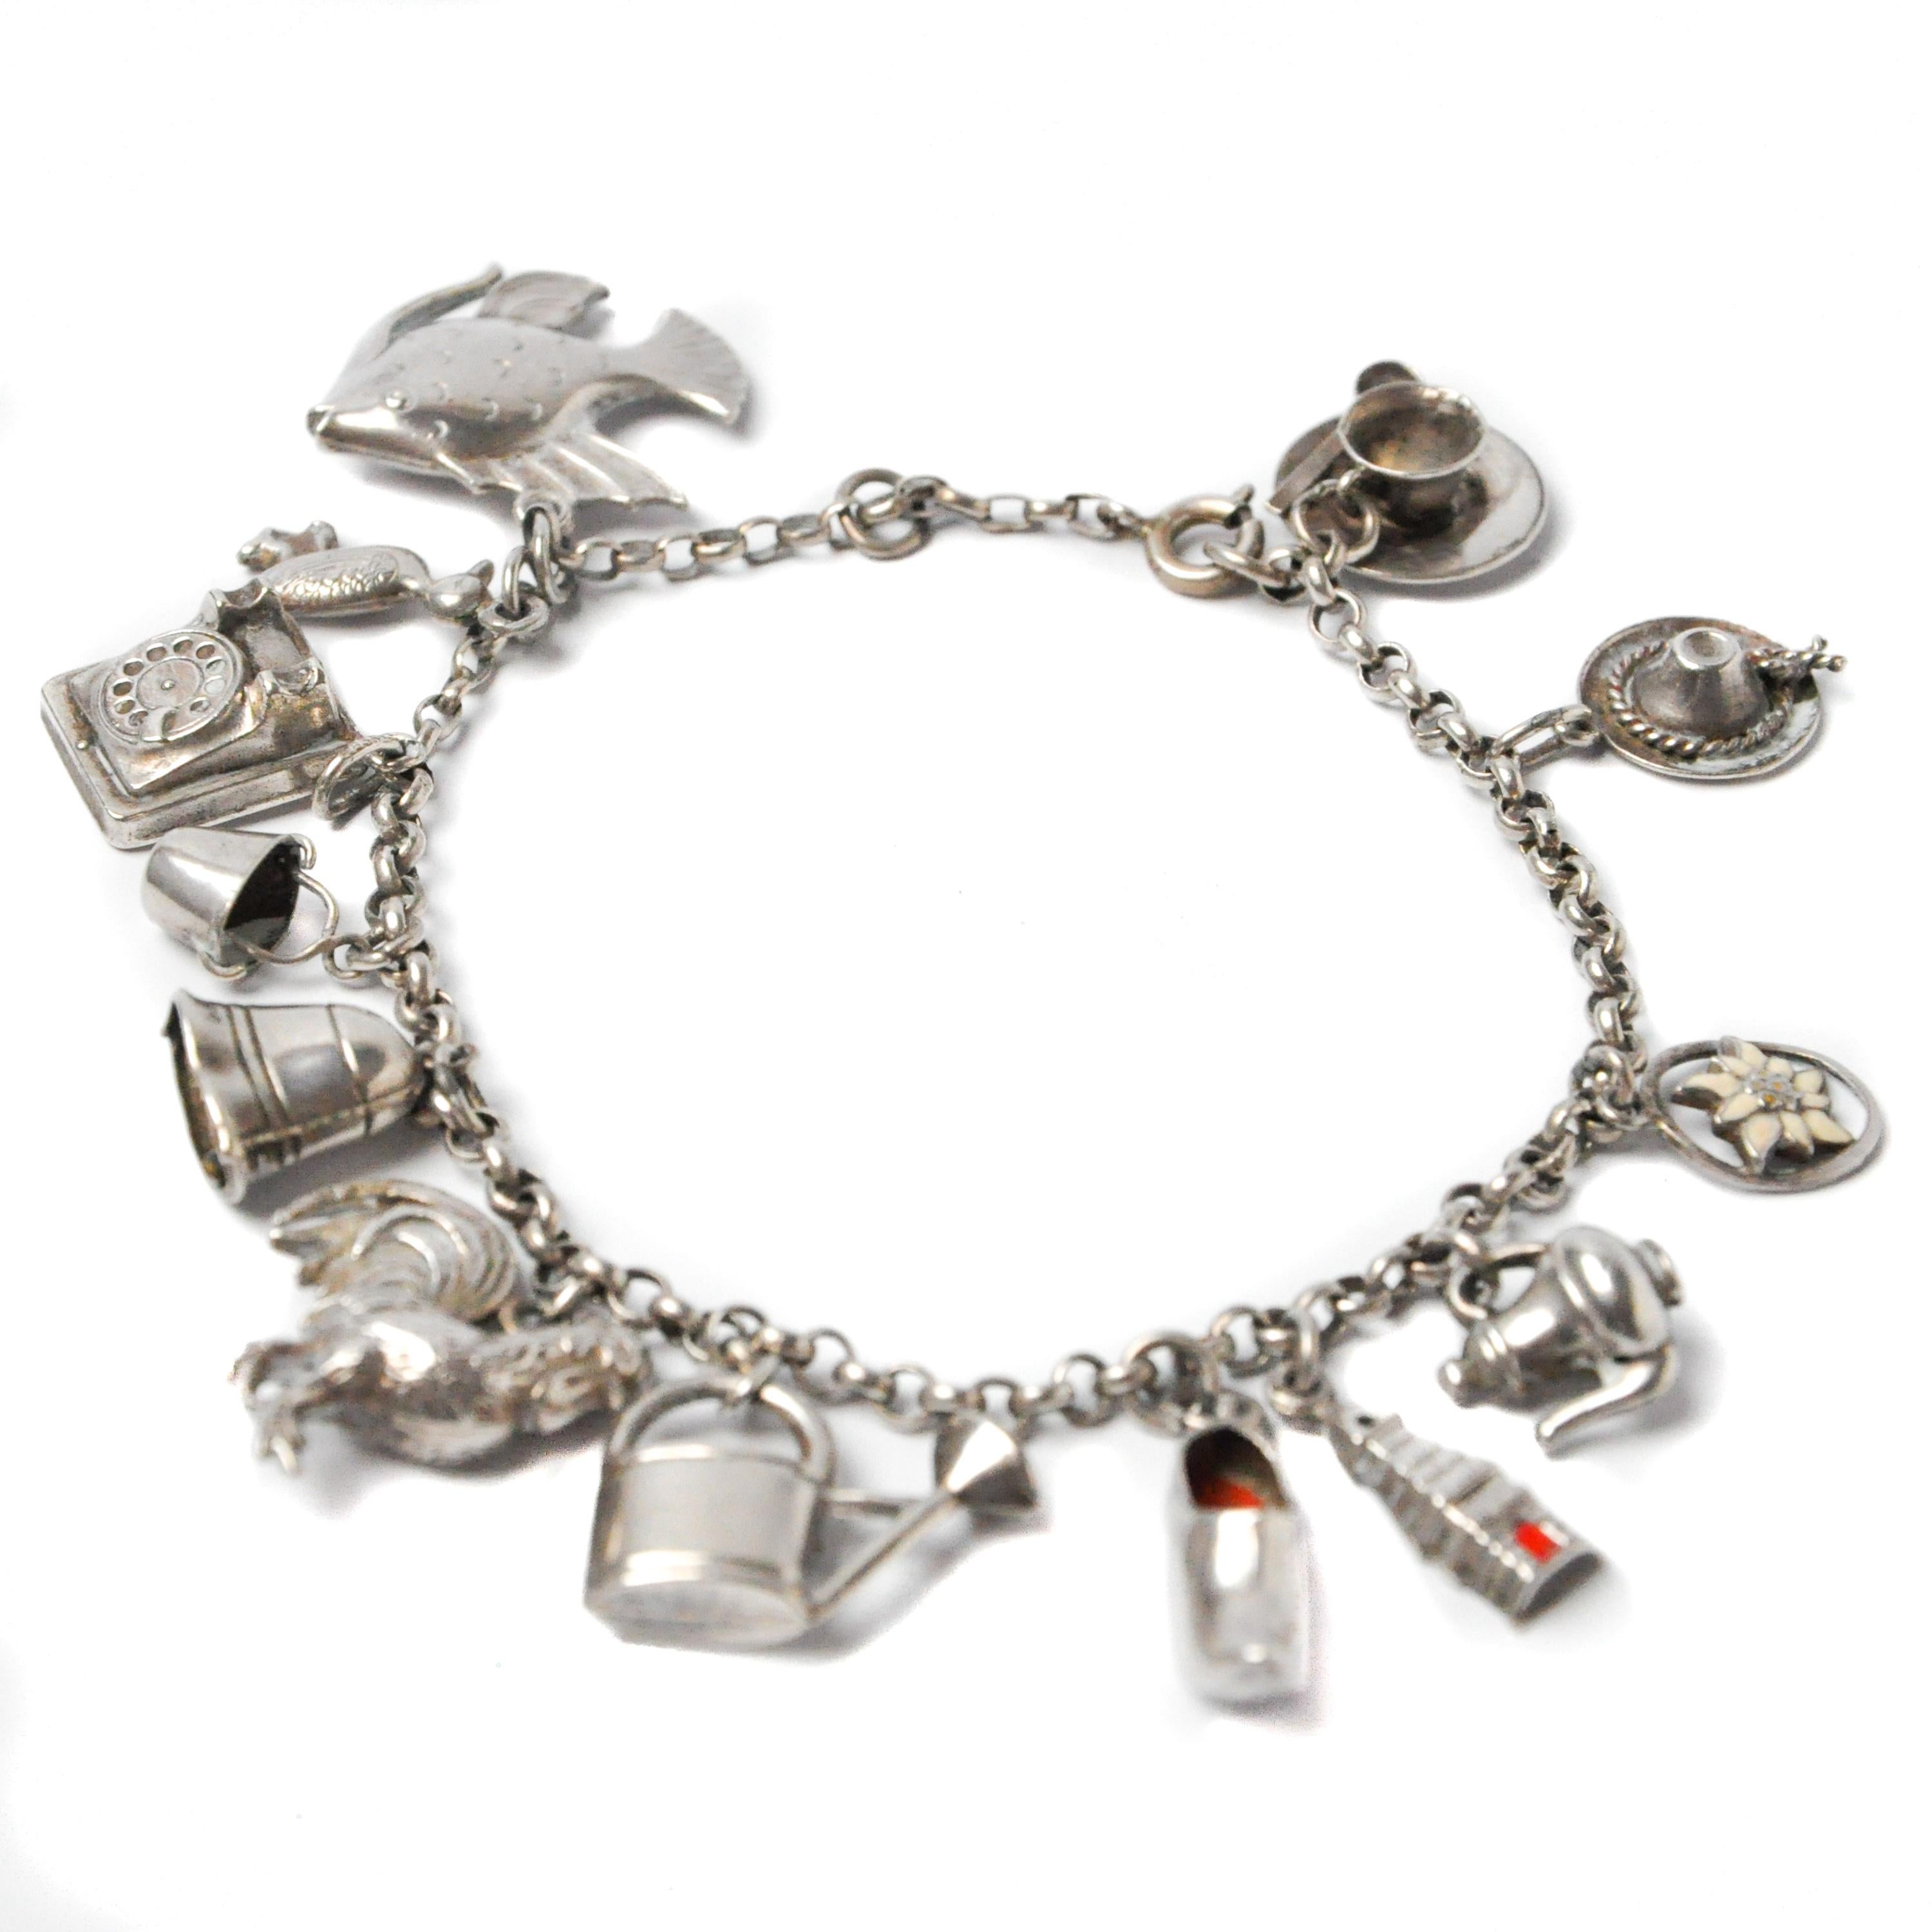 Beautiful vintage silver charm link bracelet from around 1940's with thirteen antique charms. A tea cup, hat, flower, tea pot, house, wooden shoe, watering can, rooster, bell, bucket, phone, duck and a fish. The wooden shoe and house have a red